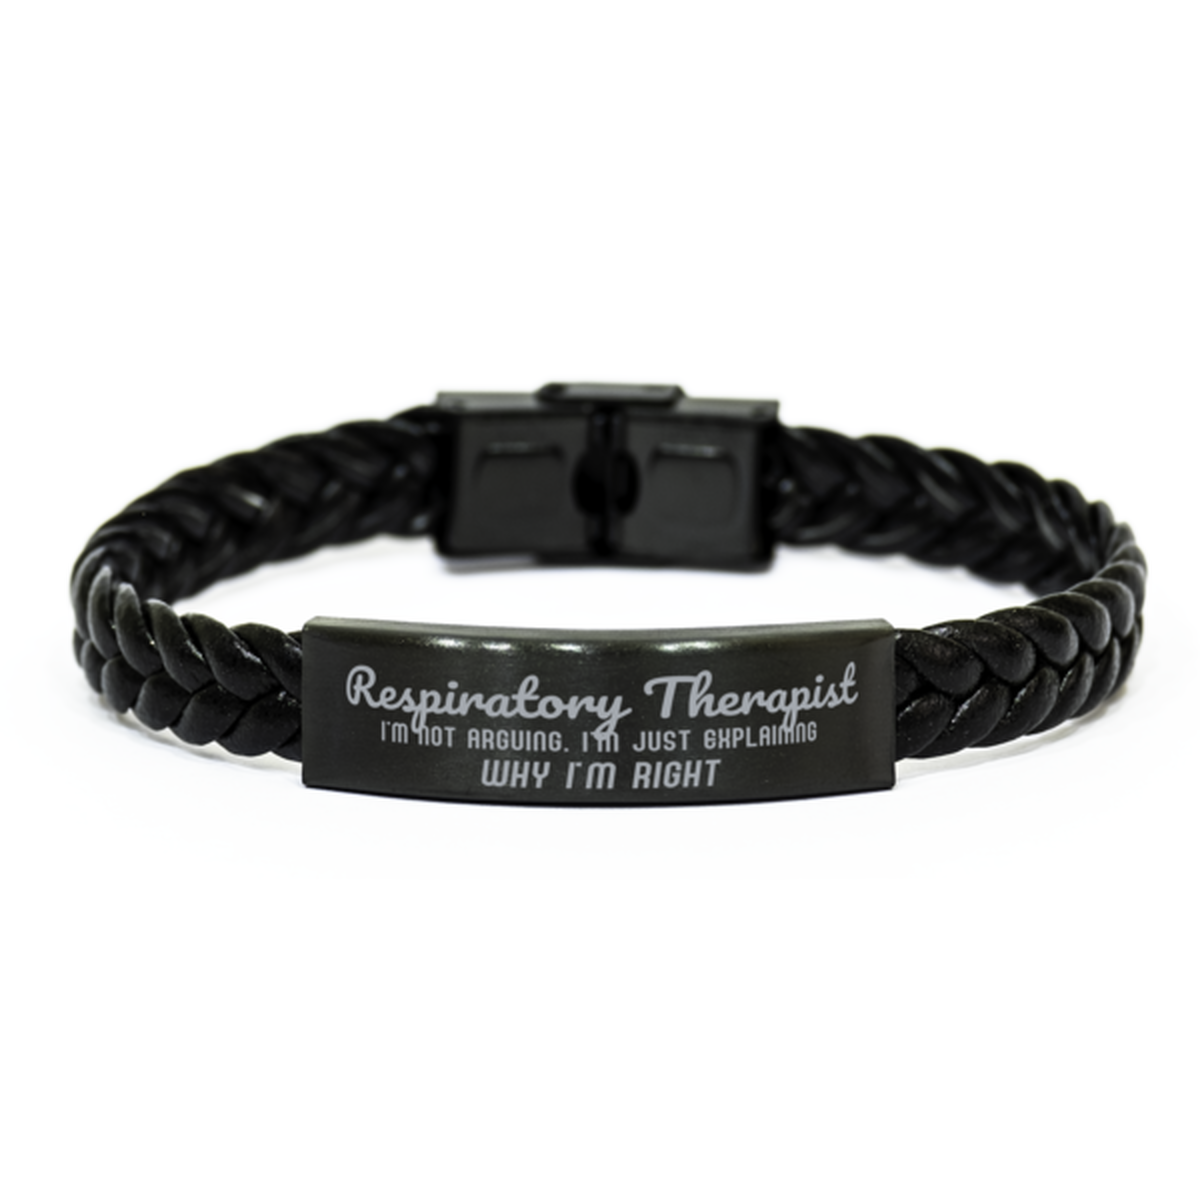 Respiratory Therapist I'm not Arguing. I'm Just Explaining Why I'm RIGHT Braided Leather Bracelet, Graduation Birthday Christmas Respiratory Therapist Gifts For Respiratory Therapist Funny Saying Quote Present for Men Women Coworker